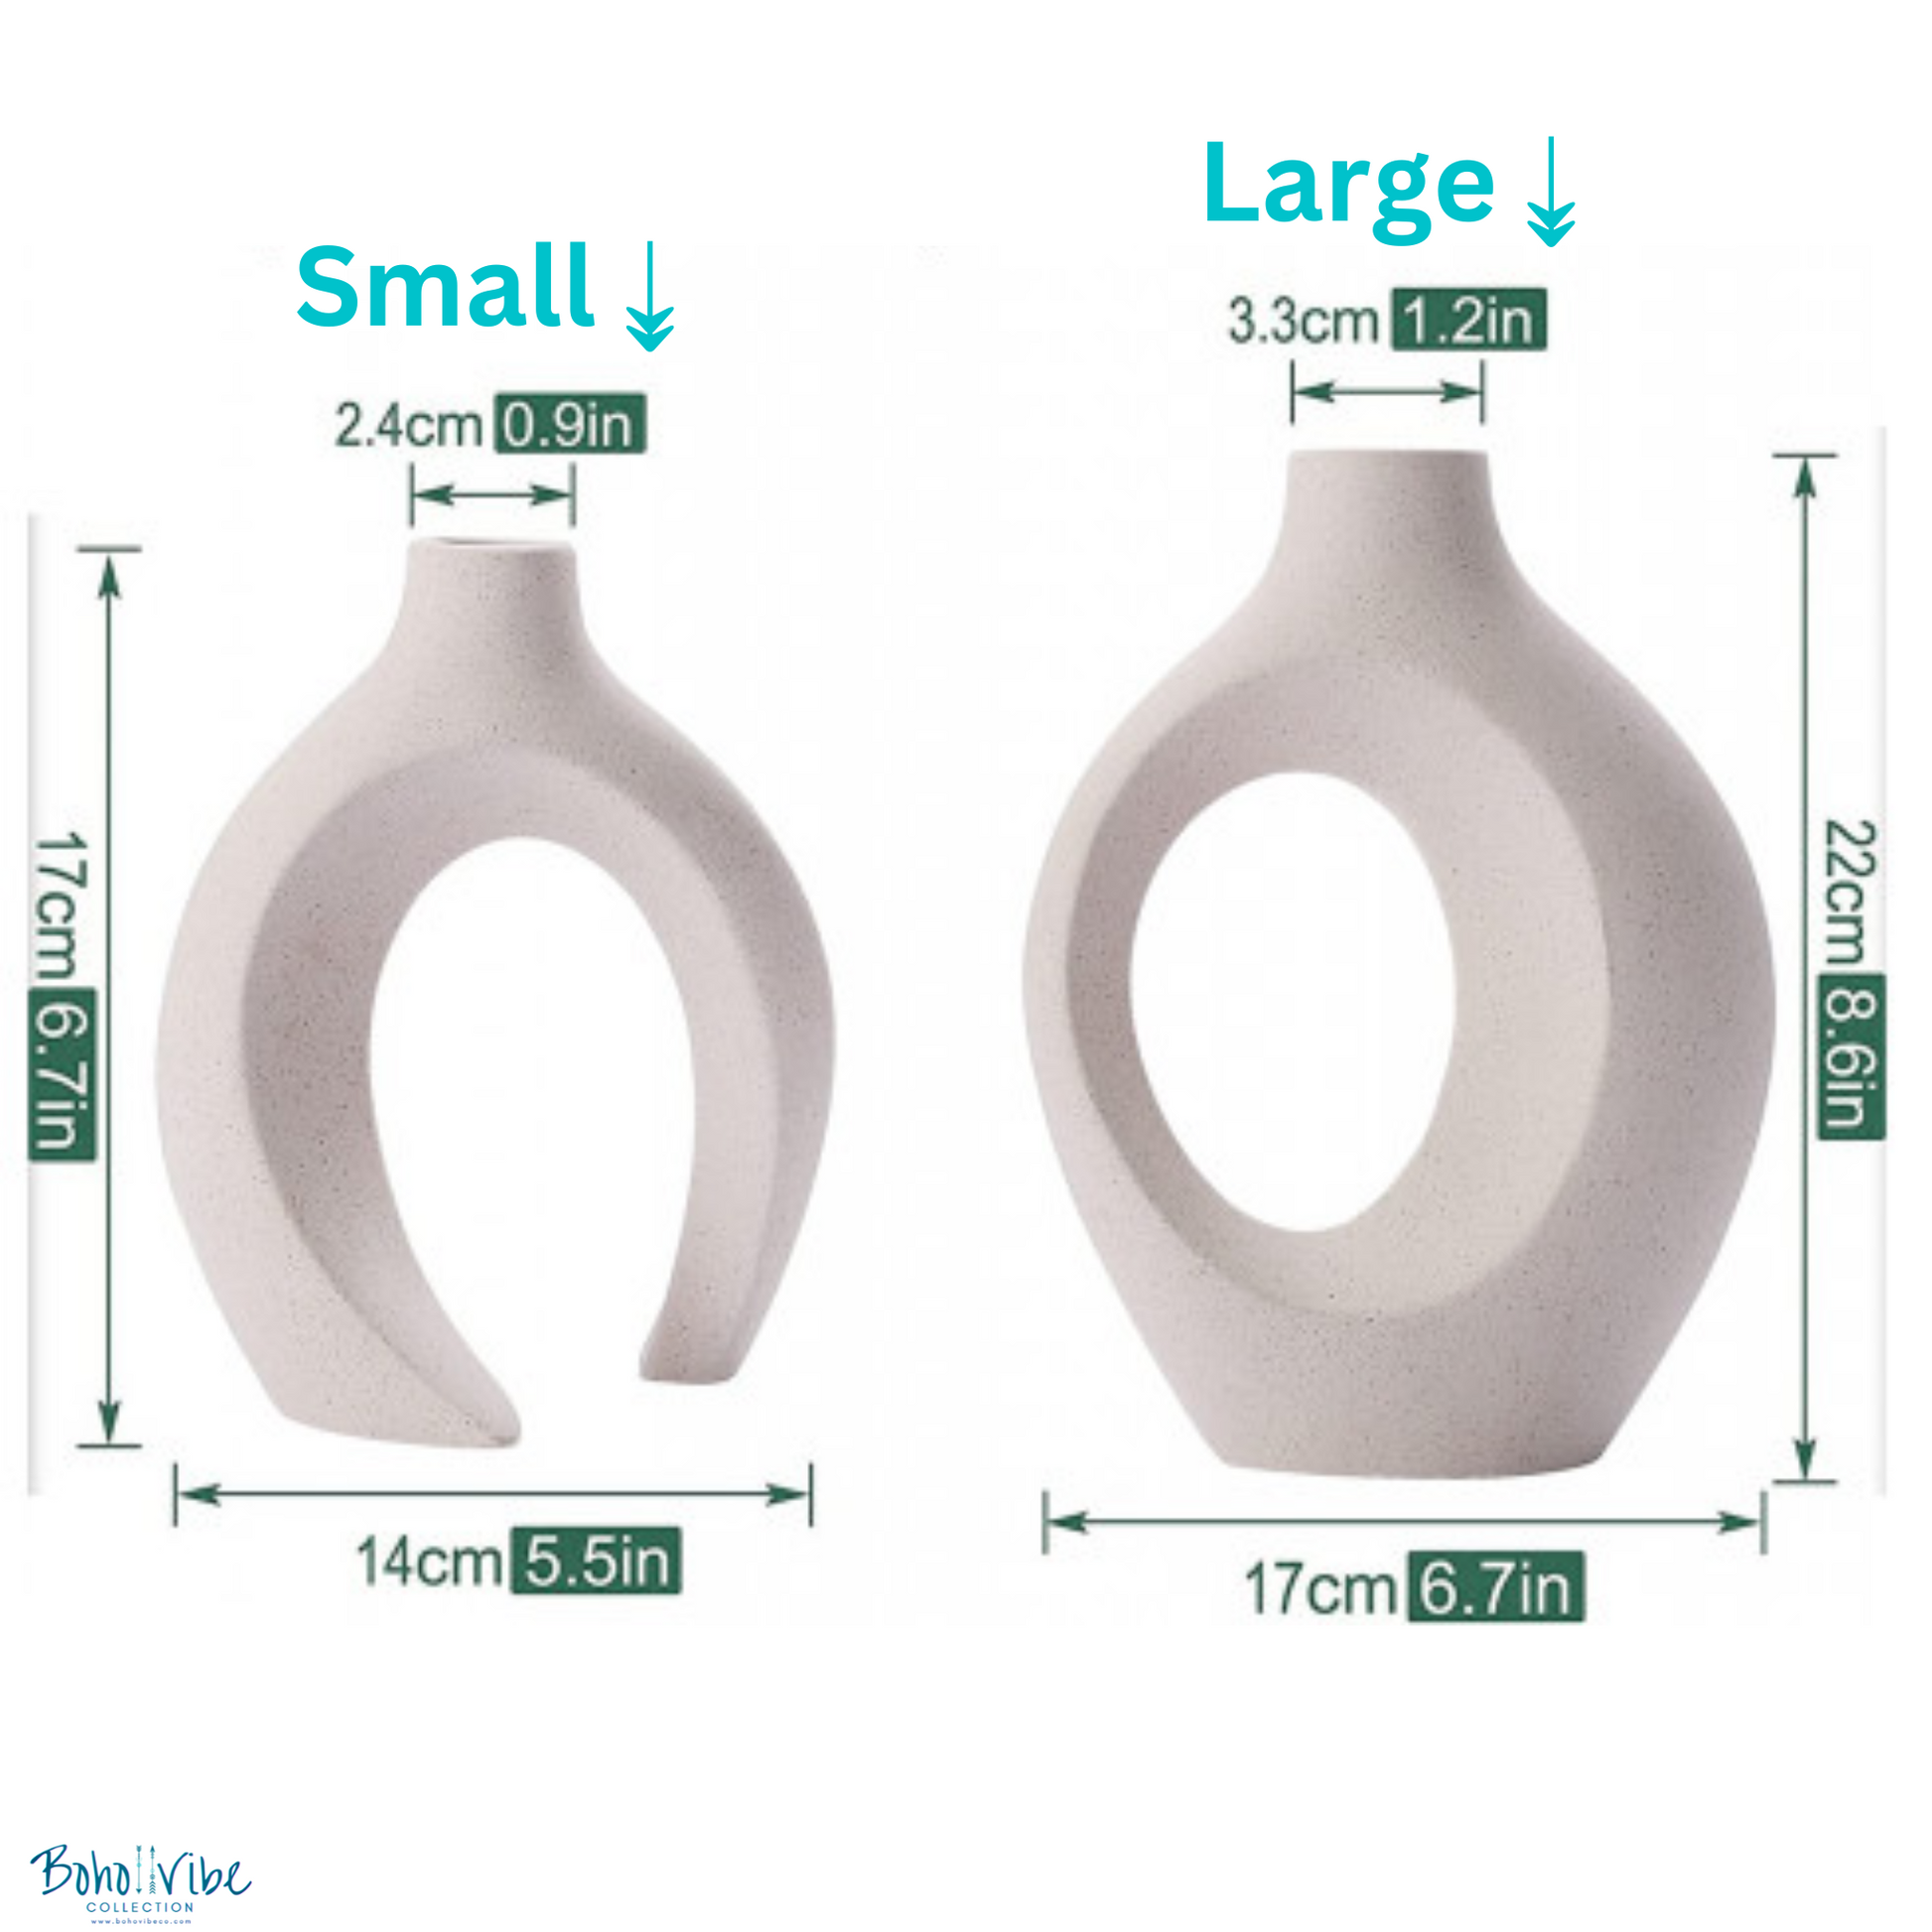 Boho ↡↟ Vibe Collection ↠ Interlocking Ceramic Teardrop Cut Out Vases Small Large Set of 2